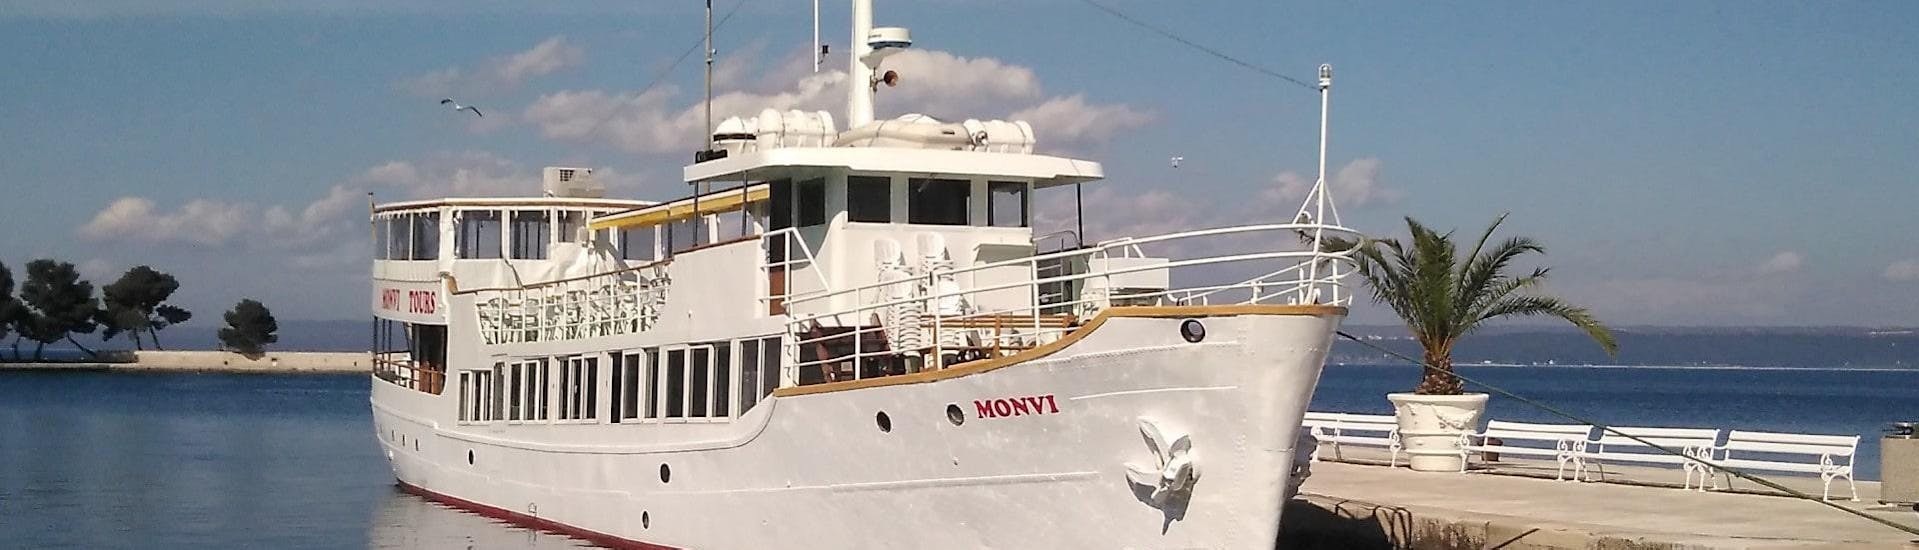 An image of the Monvi Tours Poreč boat as it anchors in the harbour of Poreč.